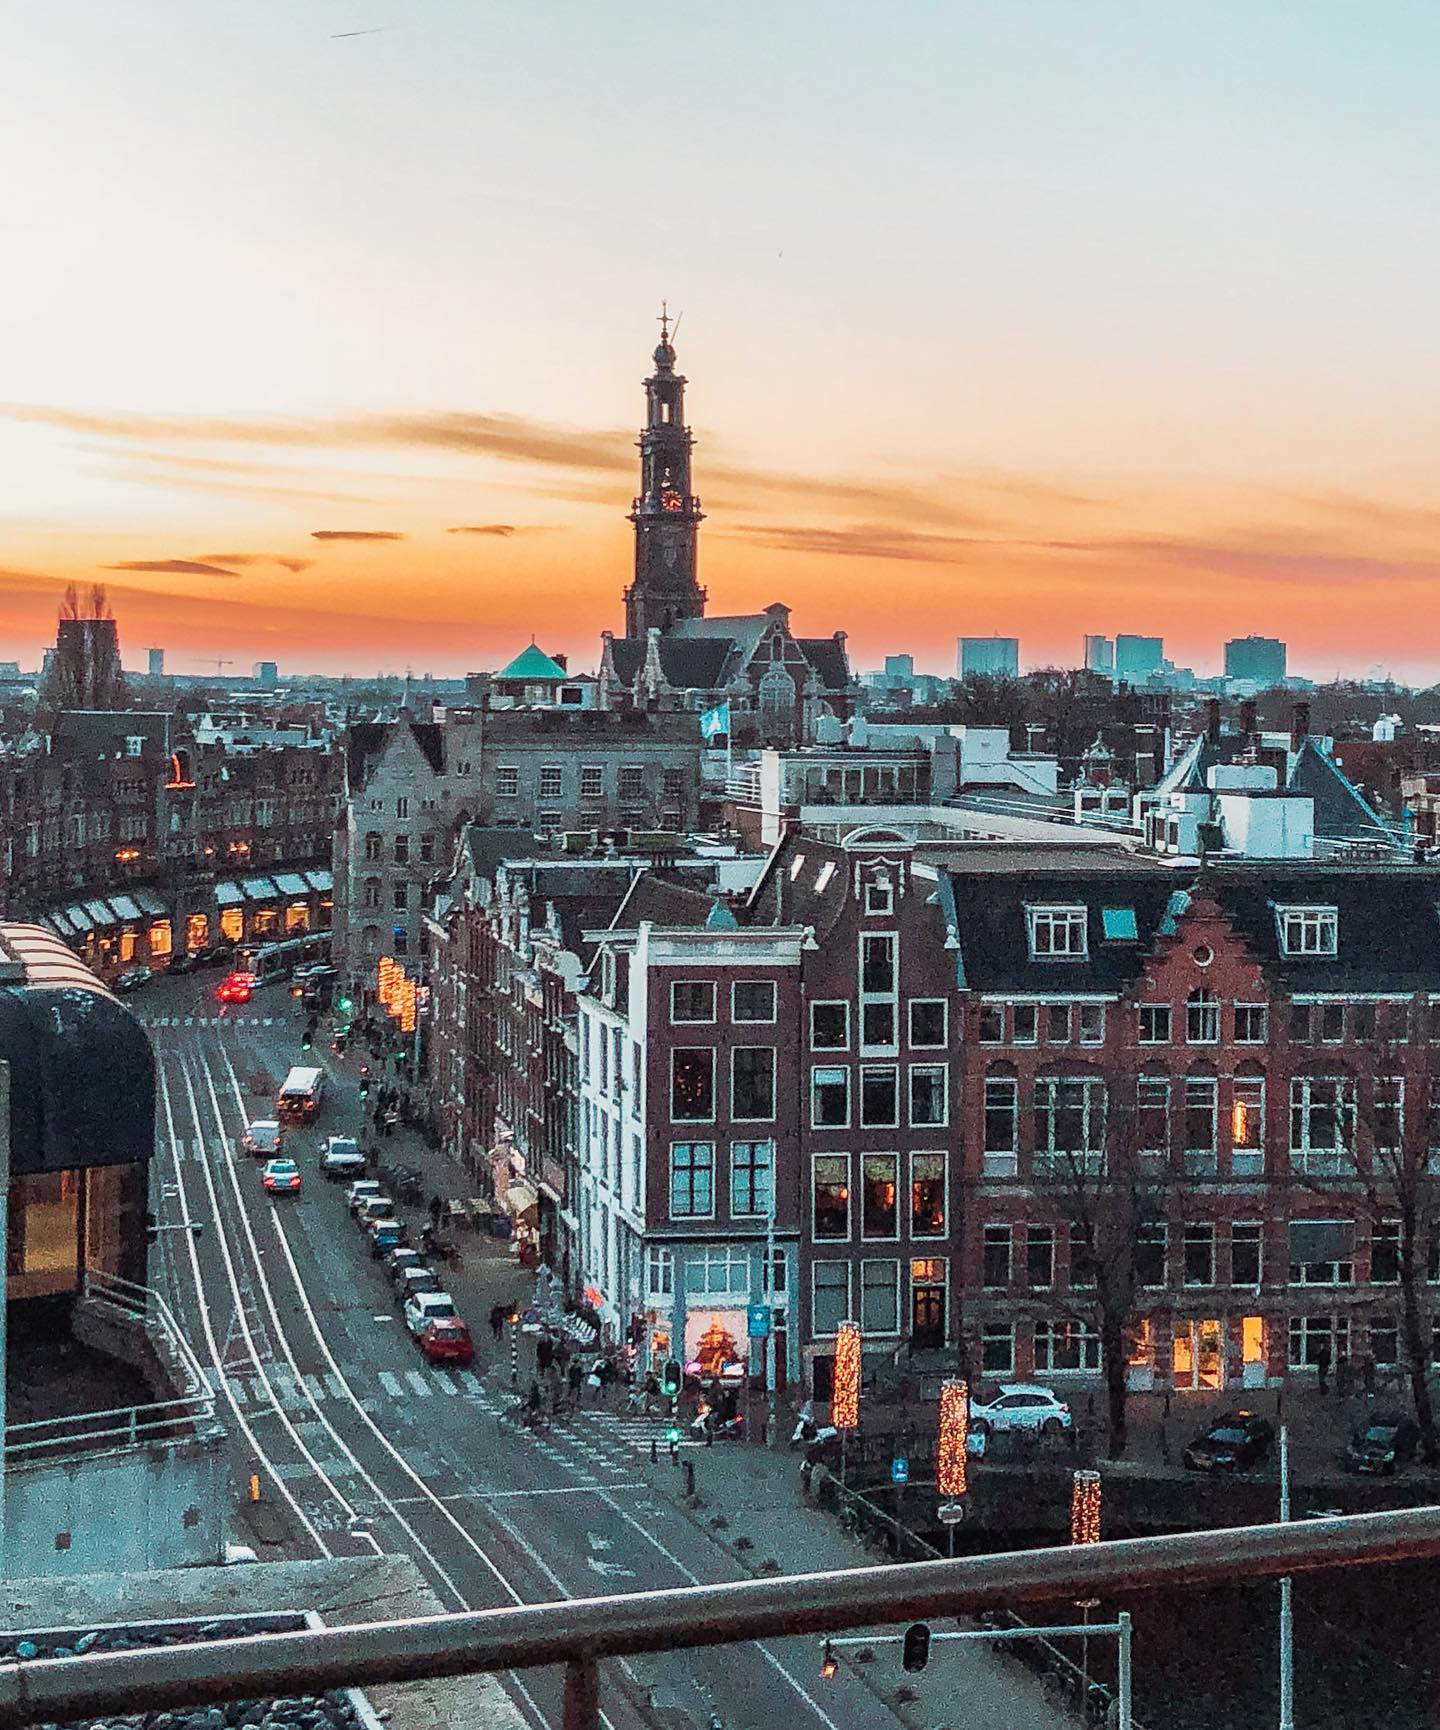 Throwing it back to my old travel days today and a winter trip to Amsterdam, one of my favourite cities at any time of year and I miss it a lot. This photo was taken from the @whotels rooftop bar. After yesterdays announcement I’m giving it a few weeks and then I think I’ll be getting some of my air miles spent! 
After two years of pretty much only North East/UK travel I’m not going to lie I’m excited to get back to a more balanced mix of home and away. 🛩
Are you booking anything yet?
⠀⠀⠀⠀⠀⠀⠀⠀⠀
#amsterdam #loveamsterdam #amsterdam_streets #amsterdamshots  #iamsterdam  #holland #netherlands #topamsterdamphoto #travel #instatravel #igtravel #cityscape #travelblog #travelblogger #travelblogging #whotel  #traveltheworld #travelpics #bestintravel #travelphotography #luxurytravel #lifestyle #lifestyleblogger #beautifuldestinations #lifestyle #citybreak #winter #january #rooftops #theprettycities